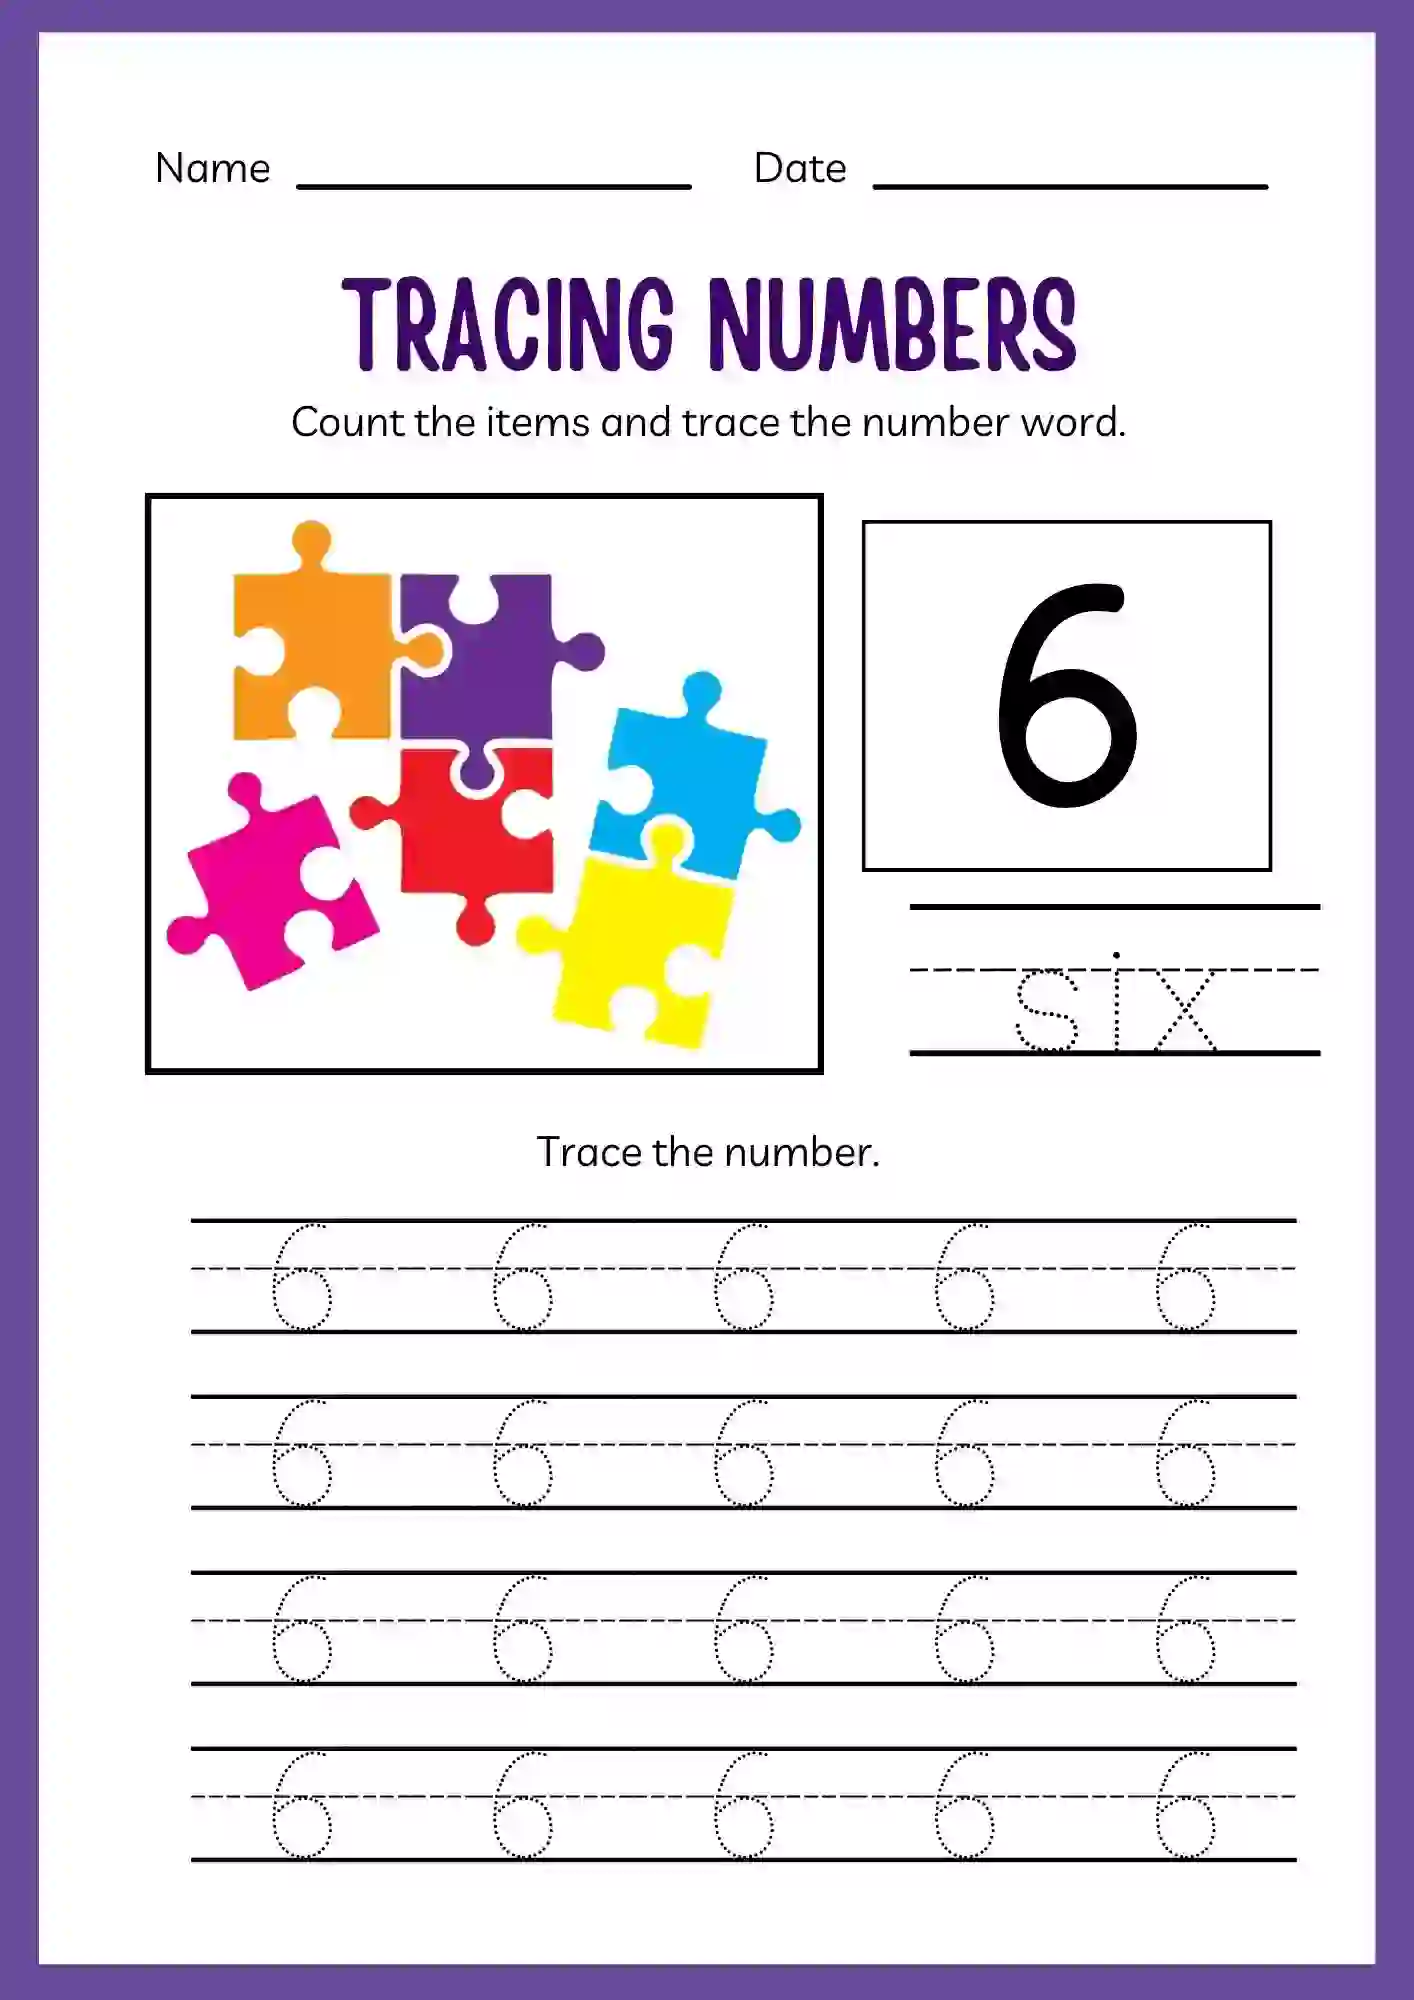 Number Tracing Worksheets 1 to 20 (Number 6 tracing sheet)